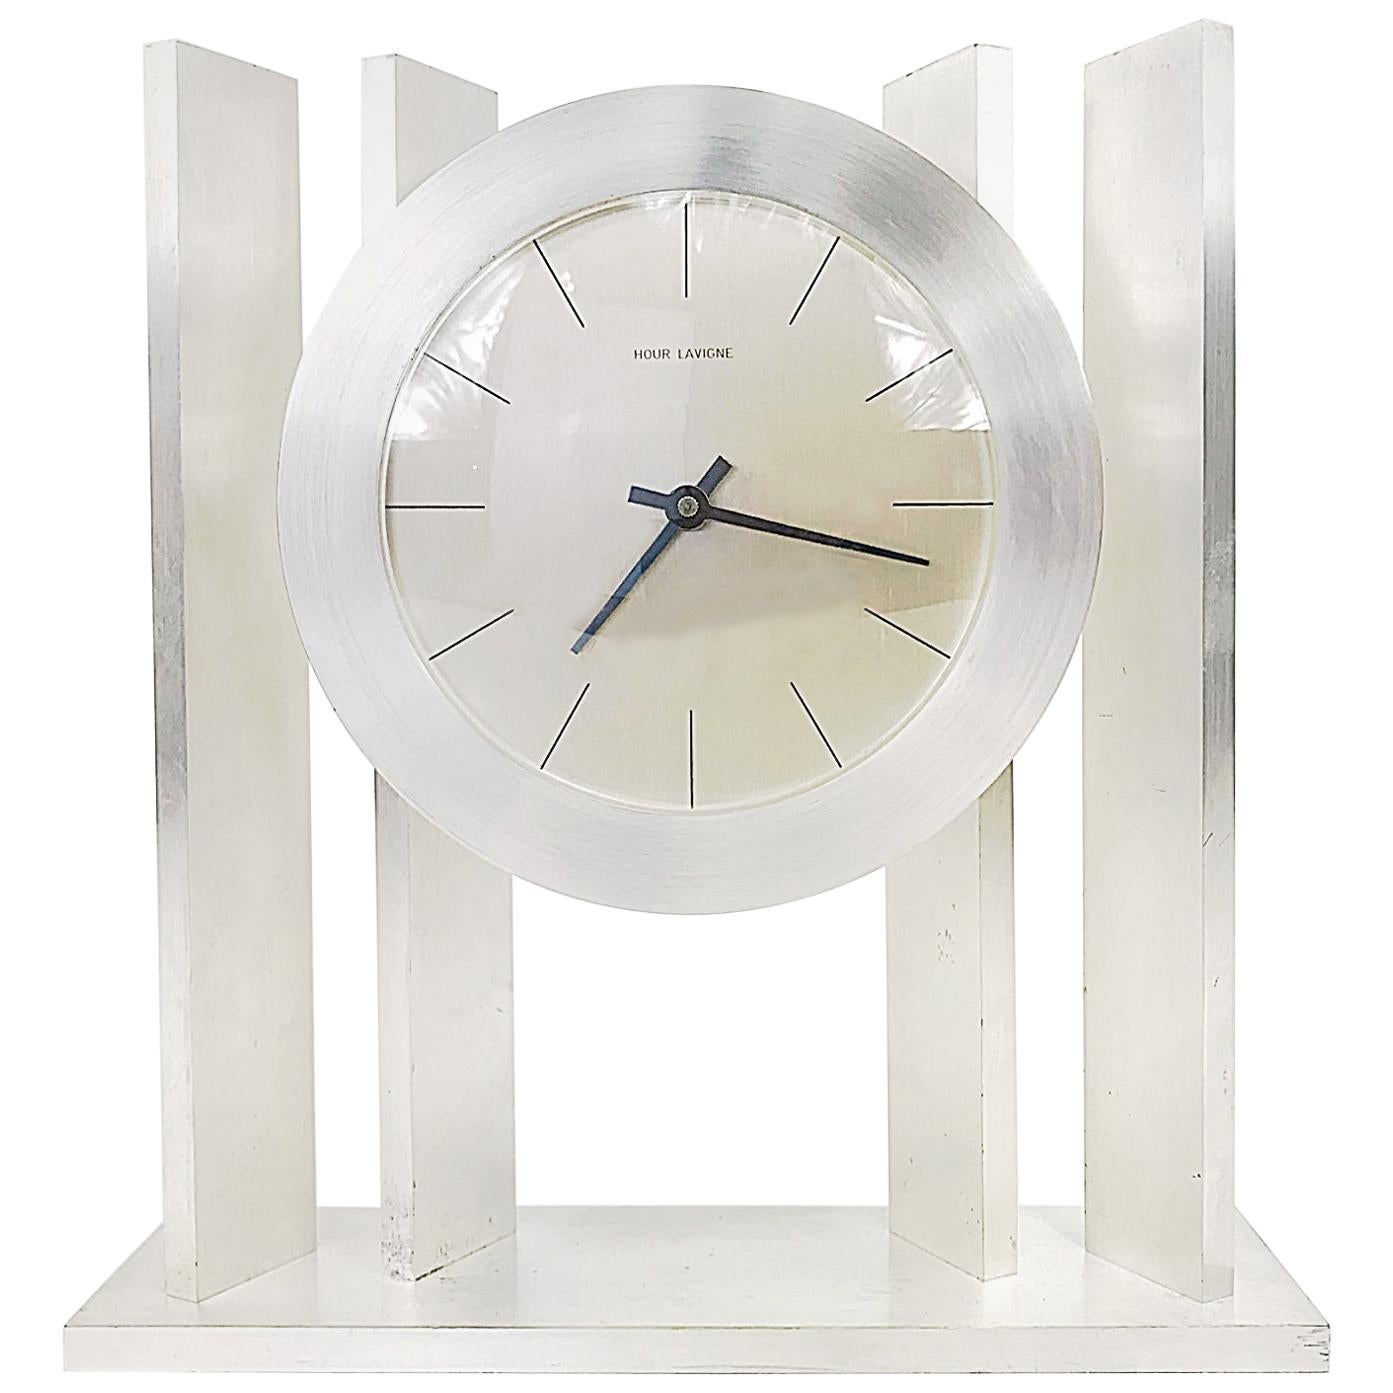 Exclusiv French Hour Lavigne Silvered Automatic Table Clock, 1960s, France For Sale